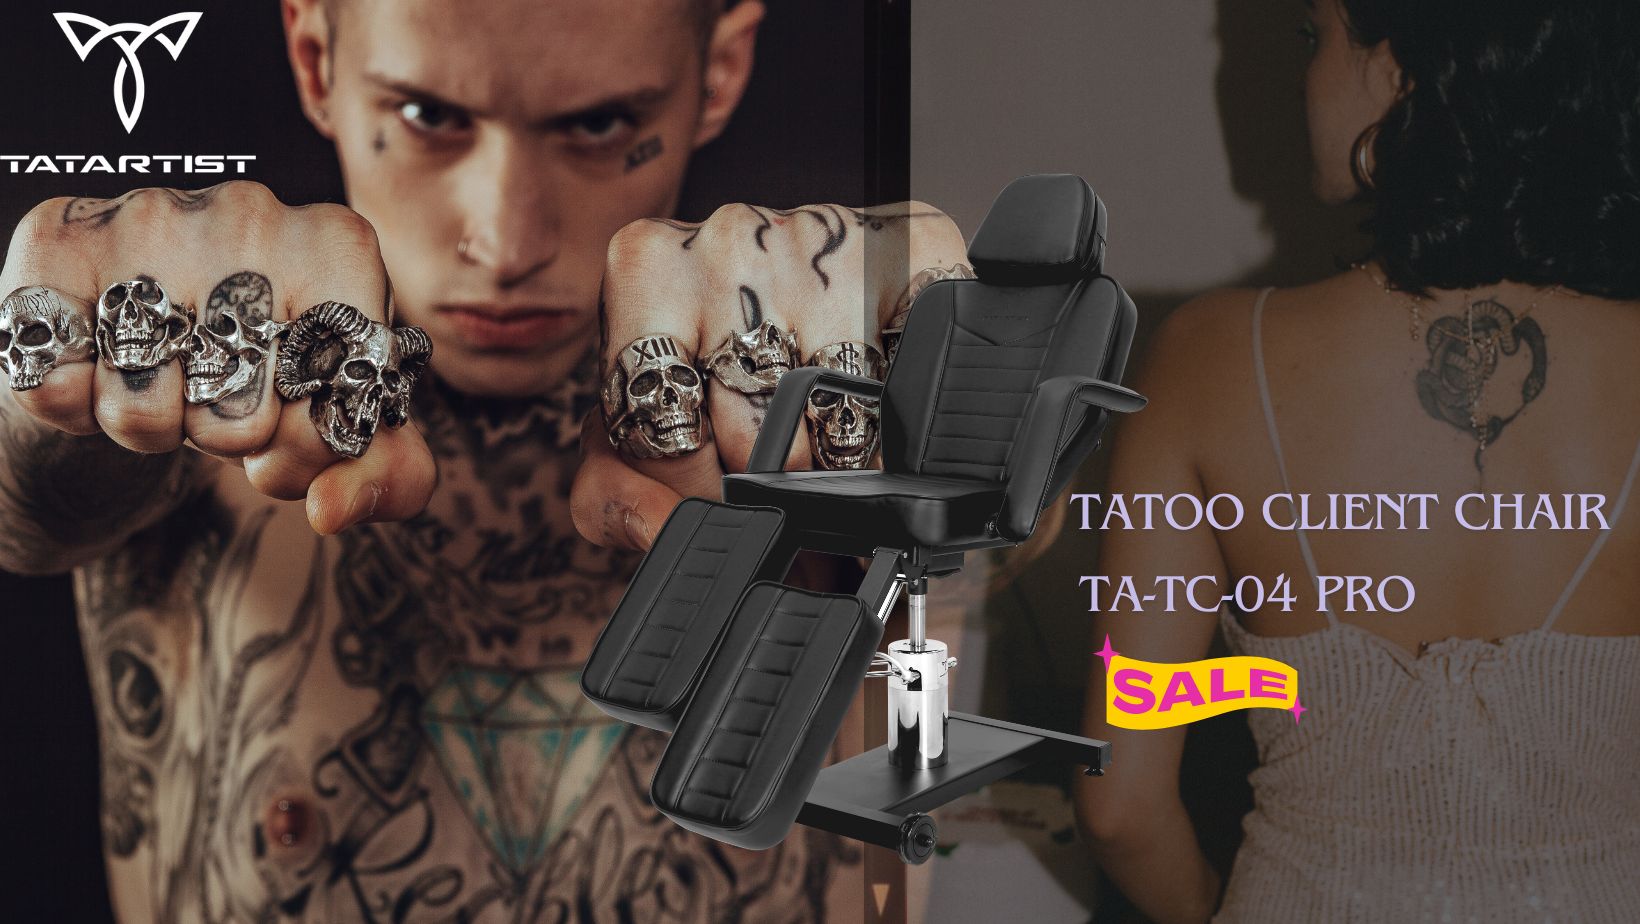 TATARTIST Tattoo Client Chair, the first choice to conquer guests